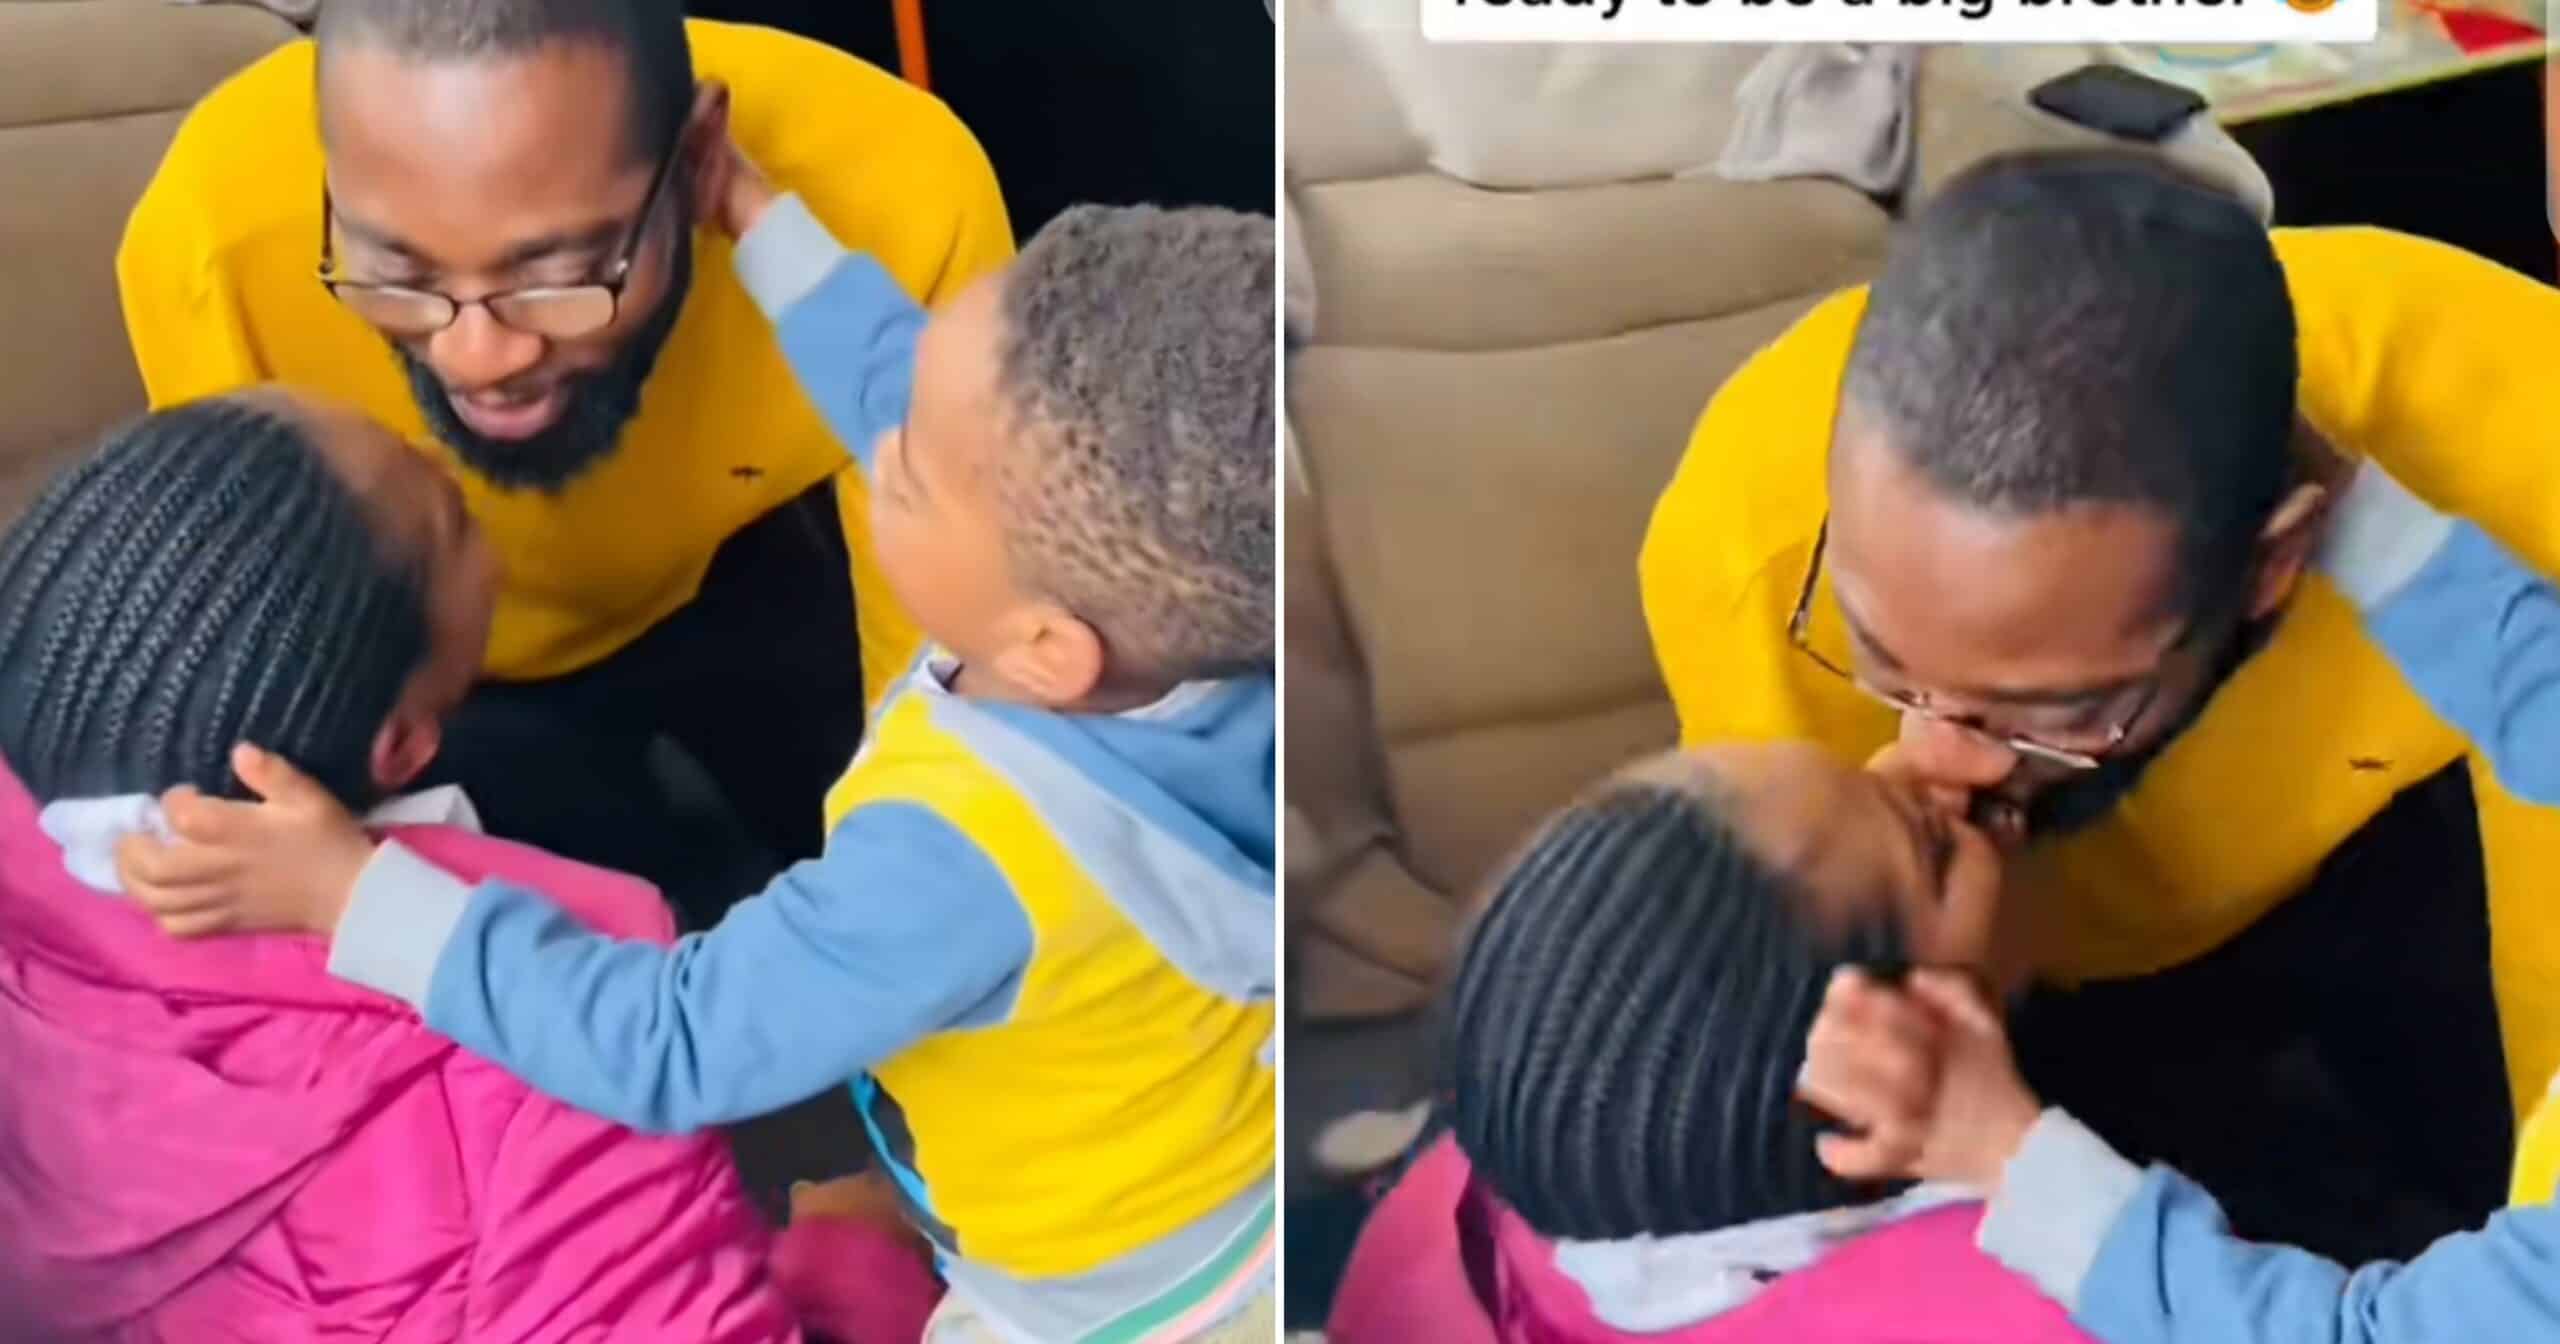 “He wants a younger one” – Reactions as 2-year-old boy makes parents kiss (Video)